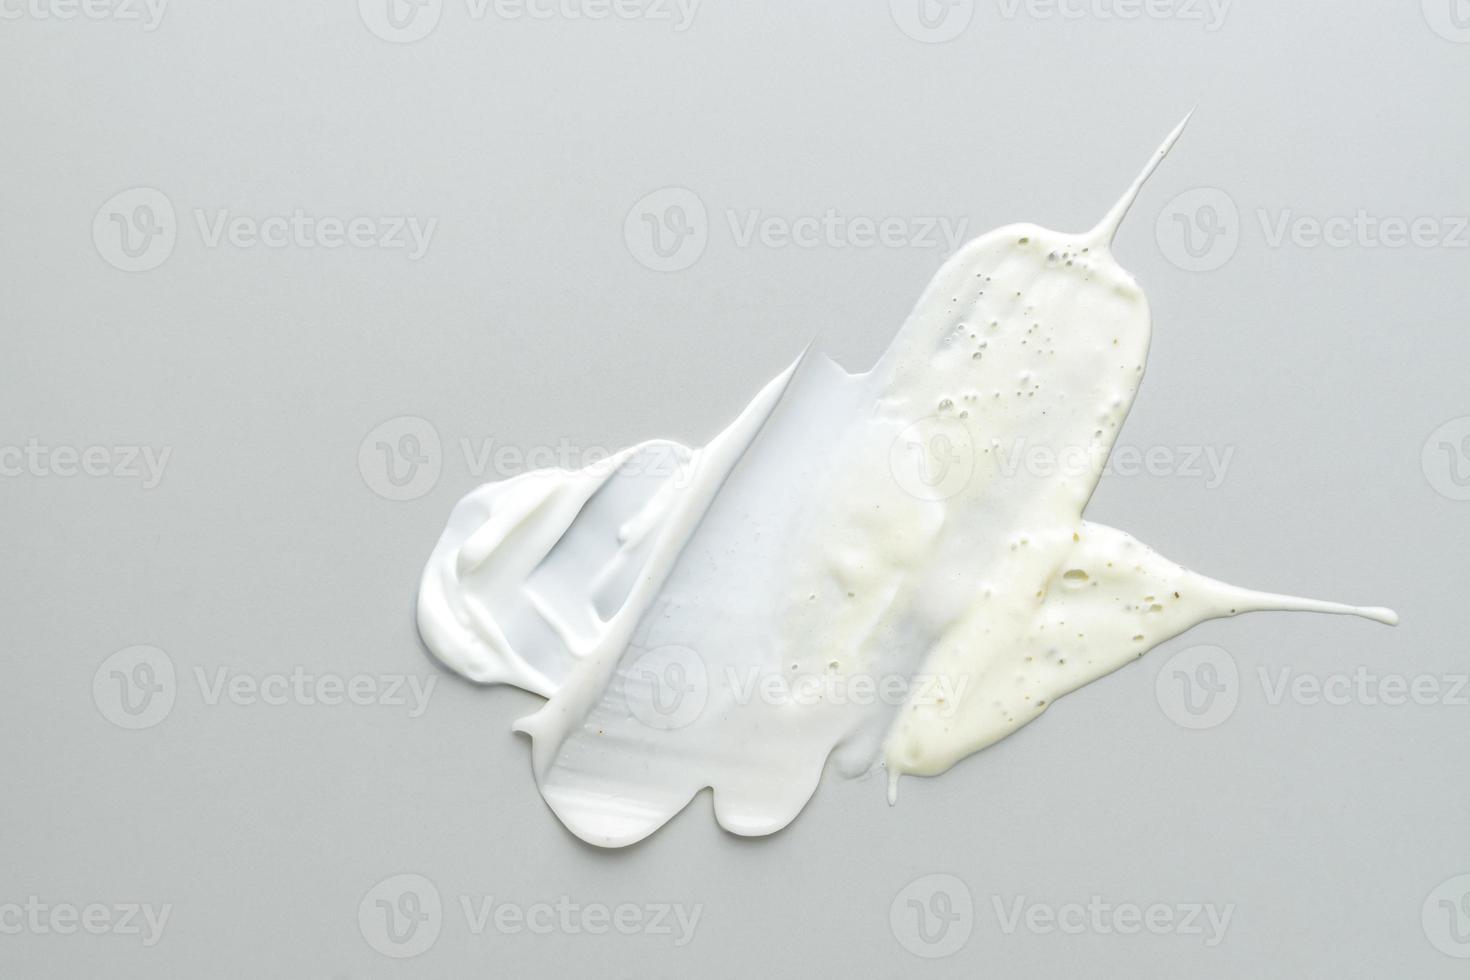 Beauty skin care product textures on gray background. Face cream, exfoliation scrub and cleancing foam smears. photo